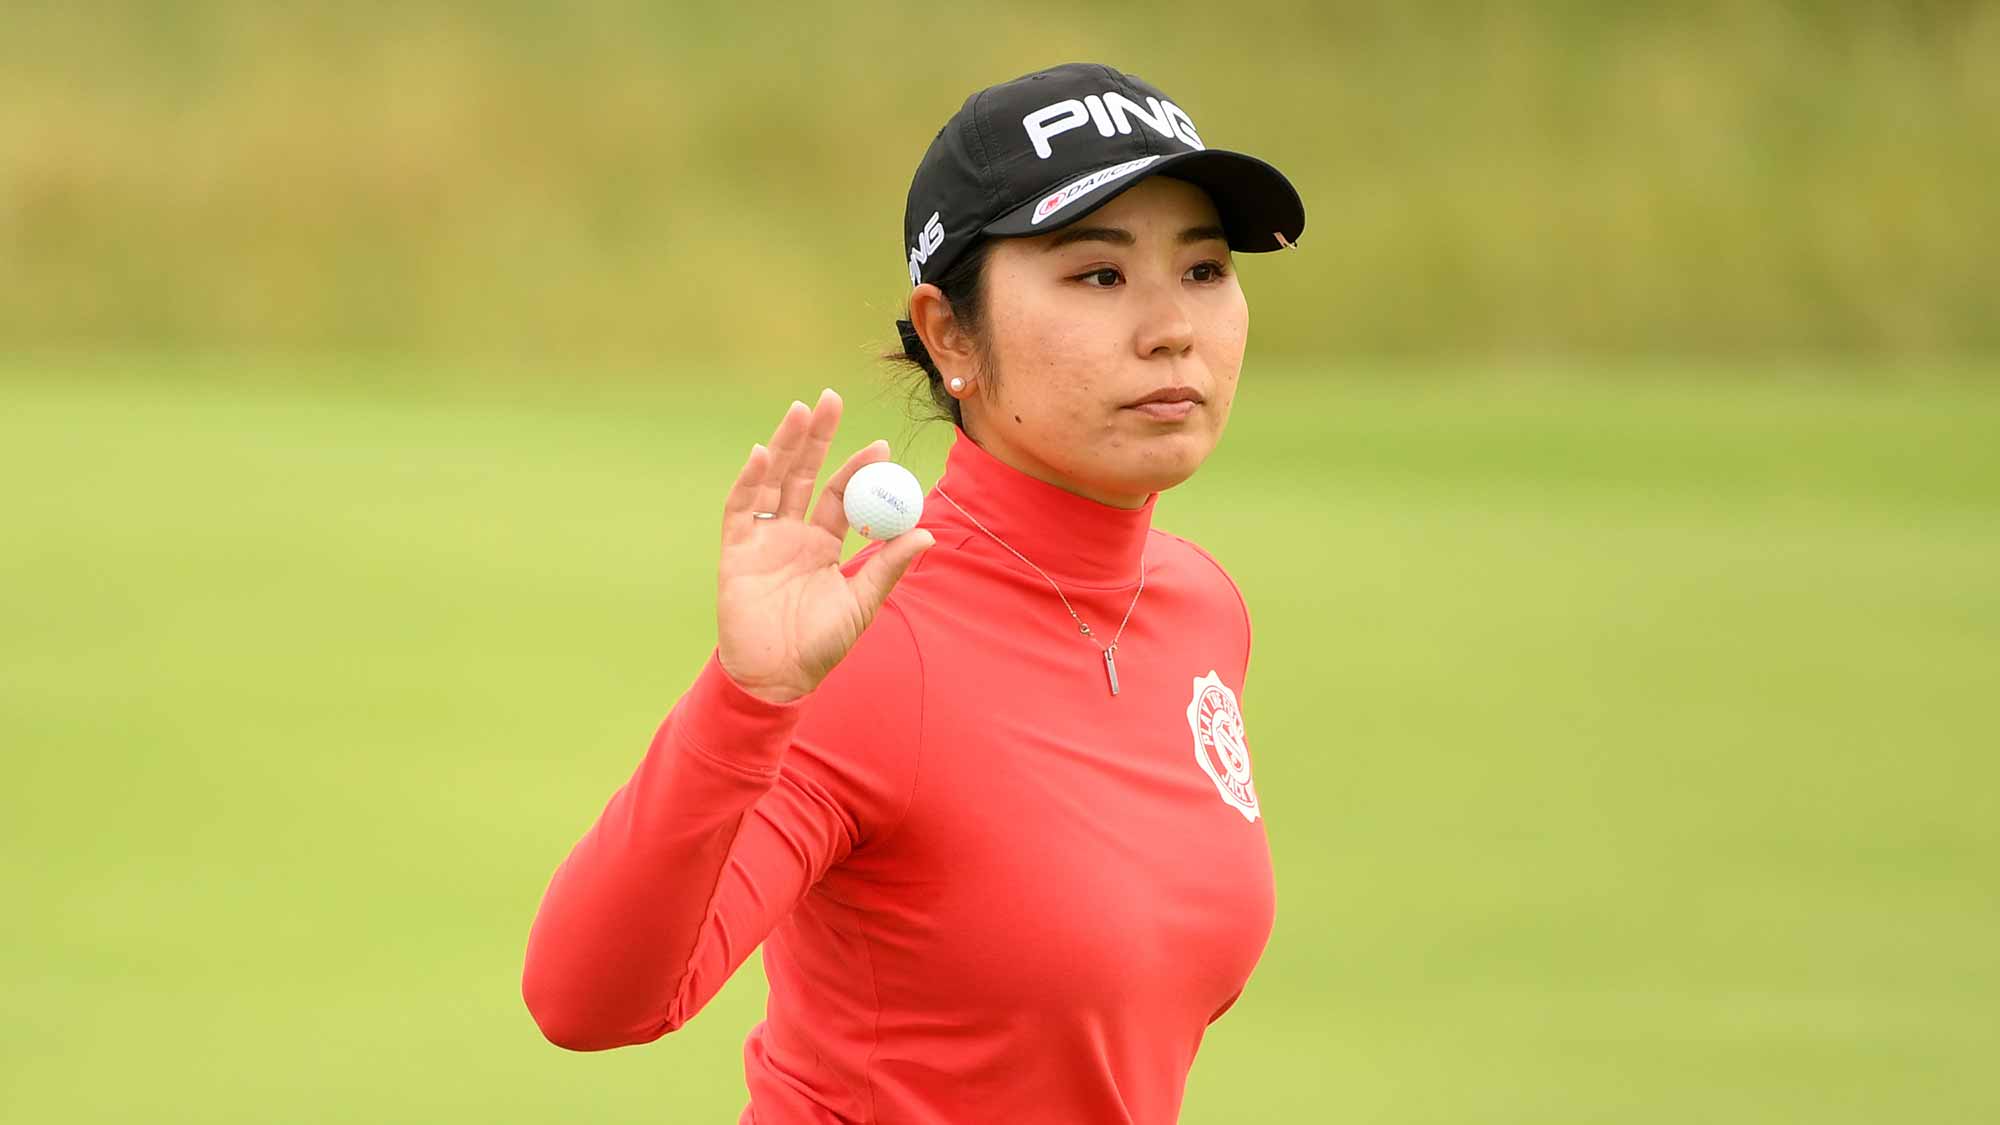 Mamiko Higa of Japan acknowledges the crowd after a shot on 3rd green during day three of Ricoh Women's British Open at Royal Lytham & St. Annes on August 4, 2018 in Lytham St Annes, England